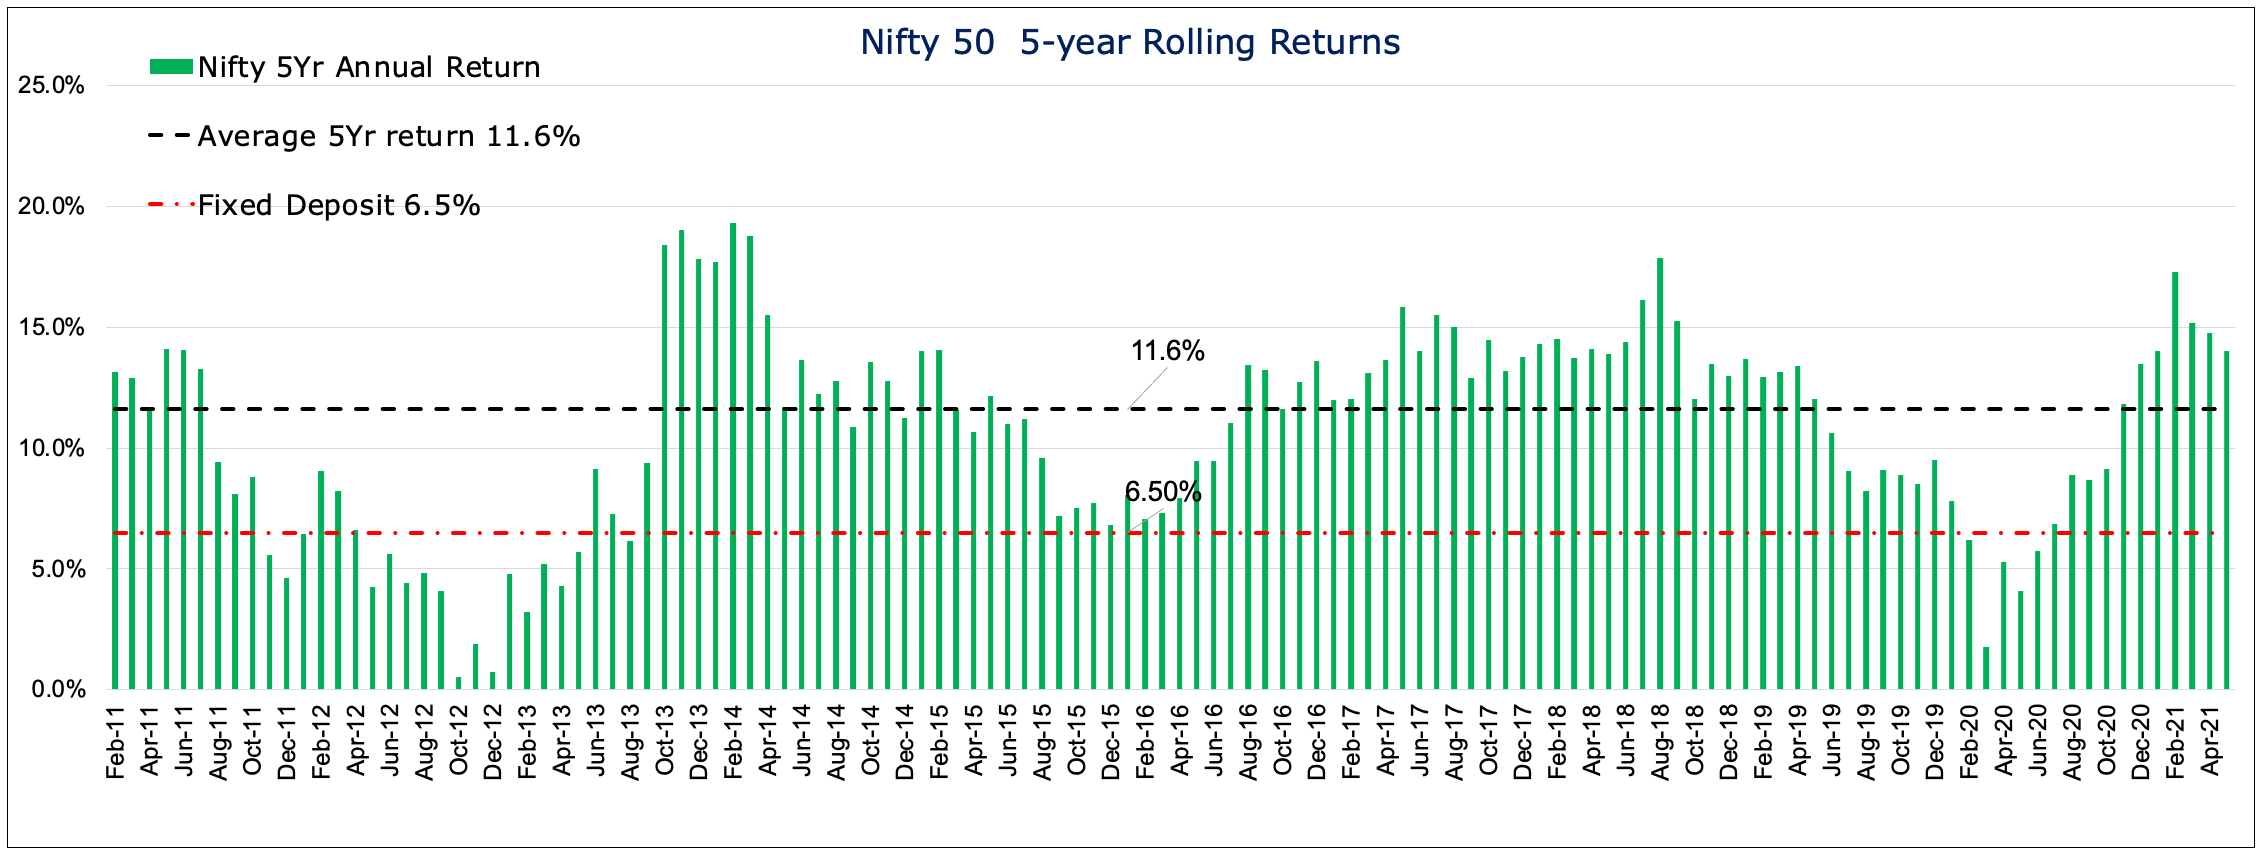 nifty 50 5 year rolling returns